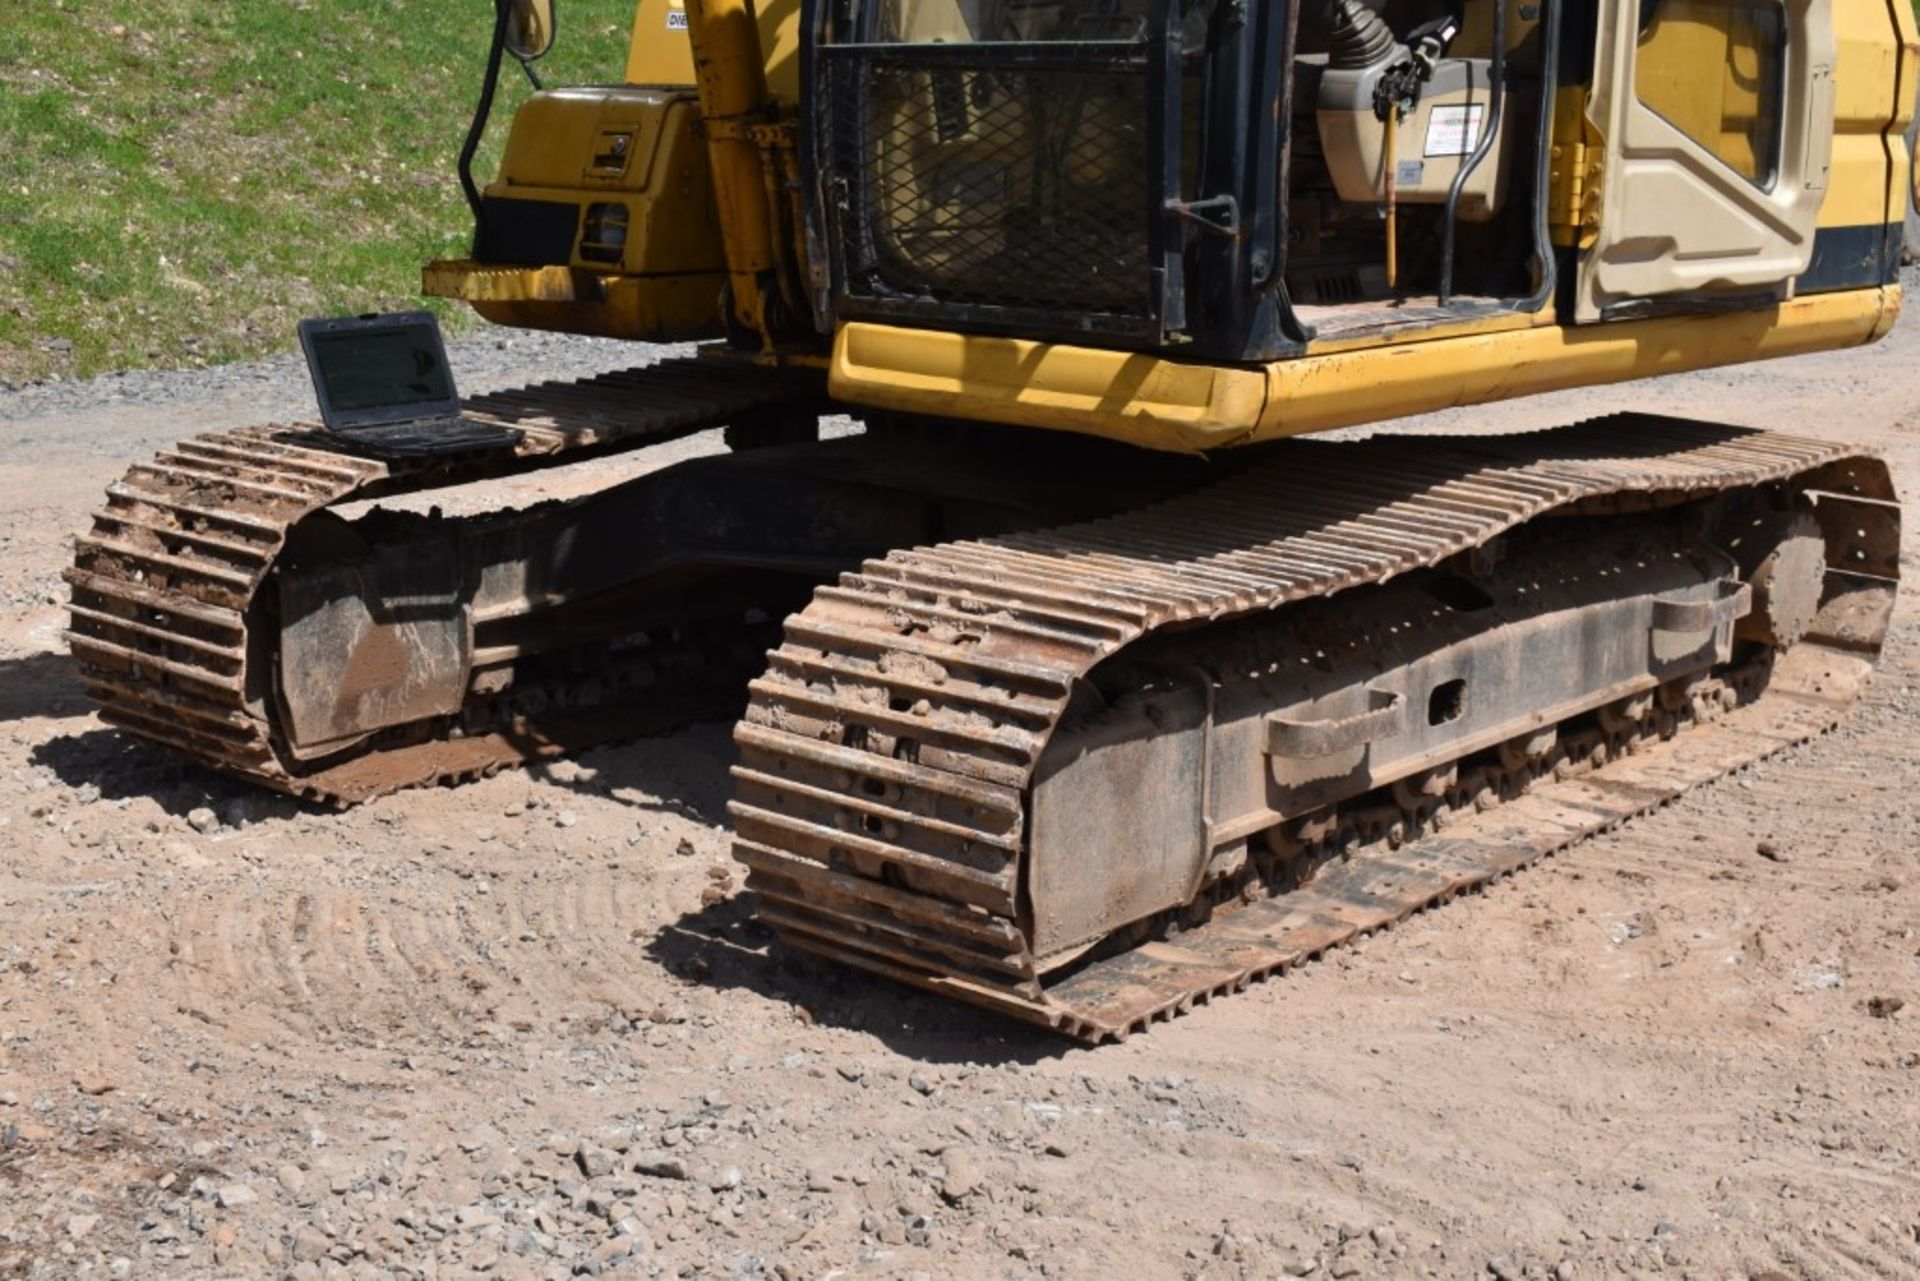 CAT 312B Excavator 11114 Hours, Runs and Operates, 48" Bucket, Auxiliary Hydraulics, Quick Coupler - Image 7 of 40